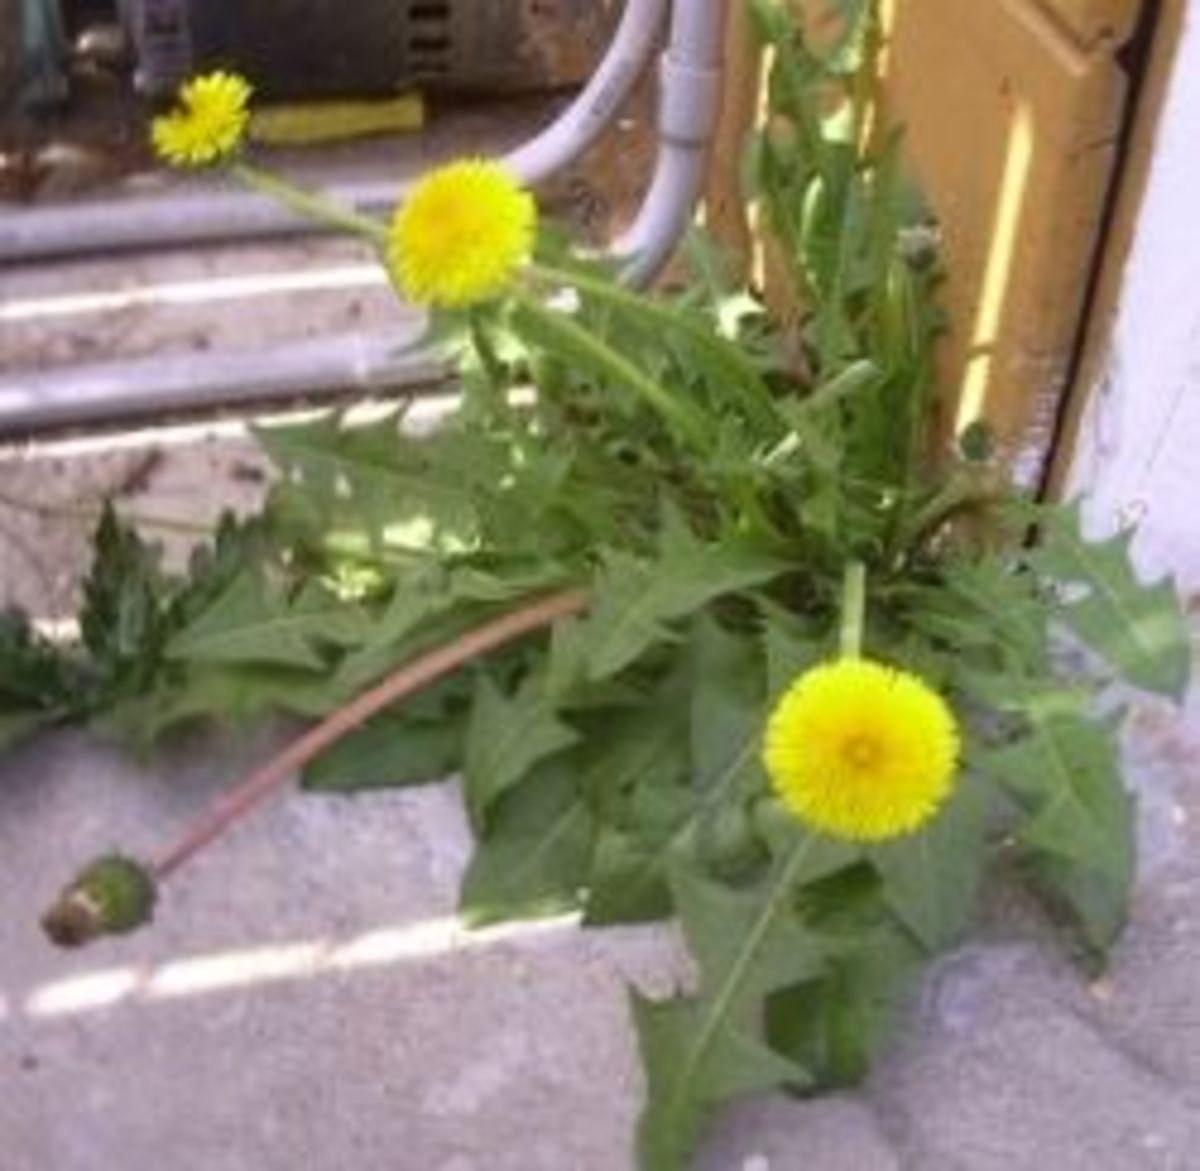 Dandelions - A nutritious edible weed